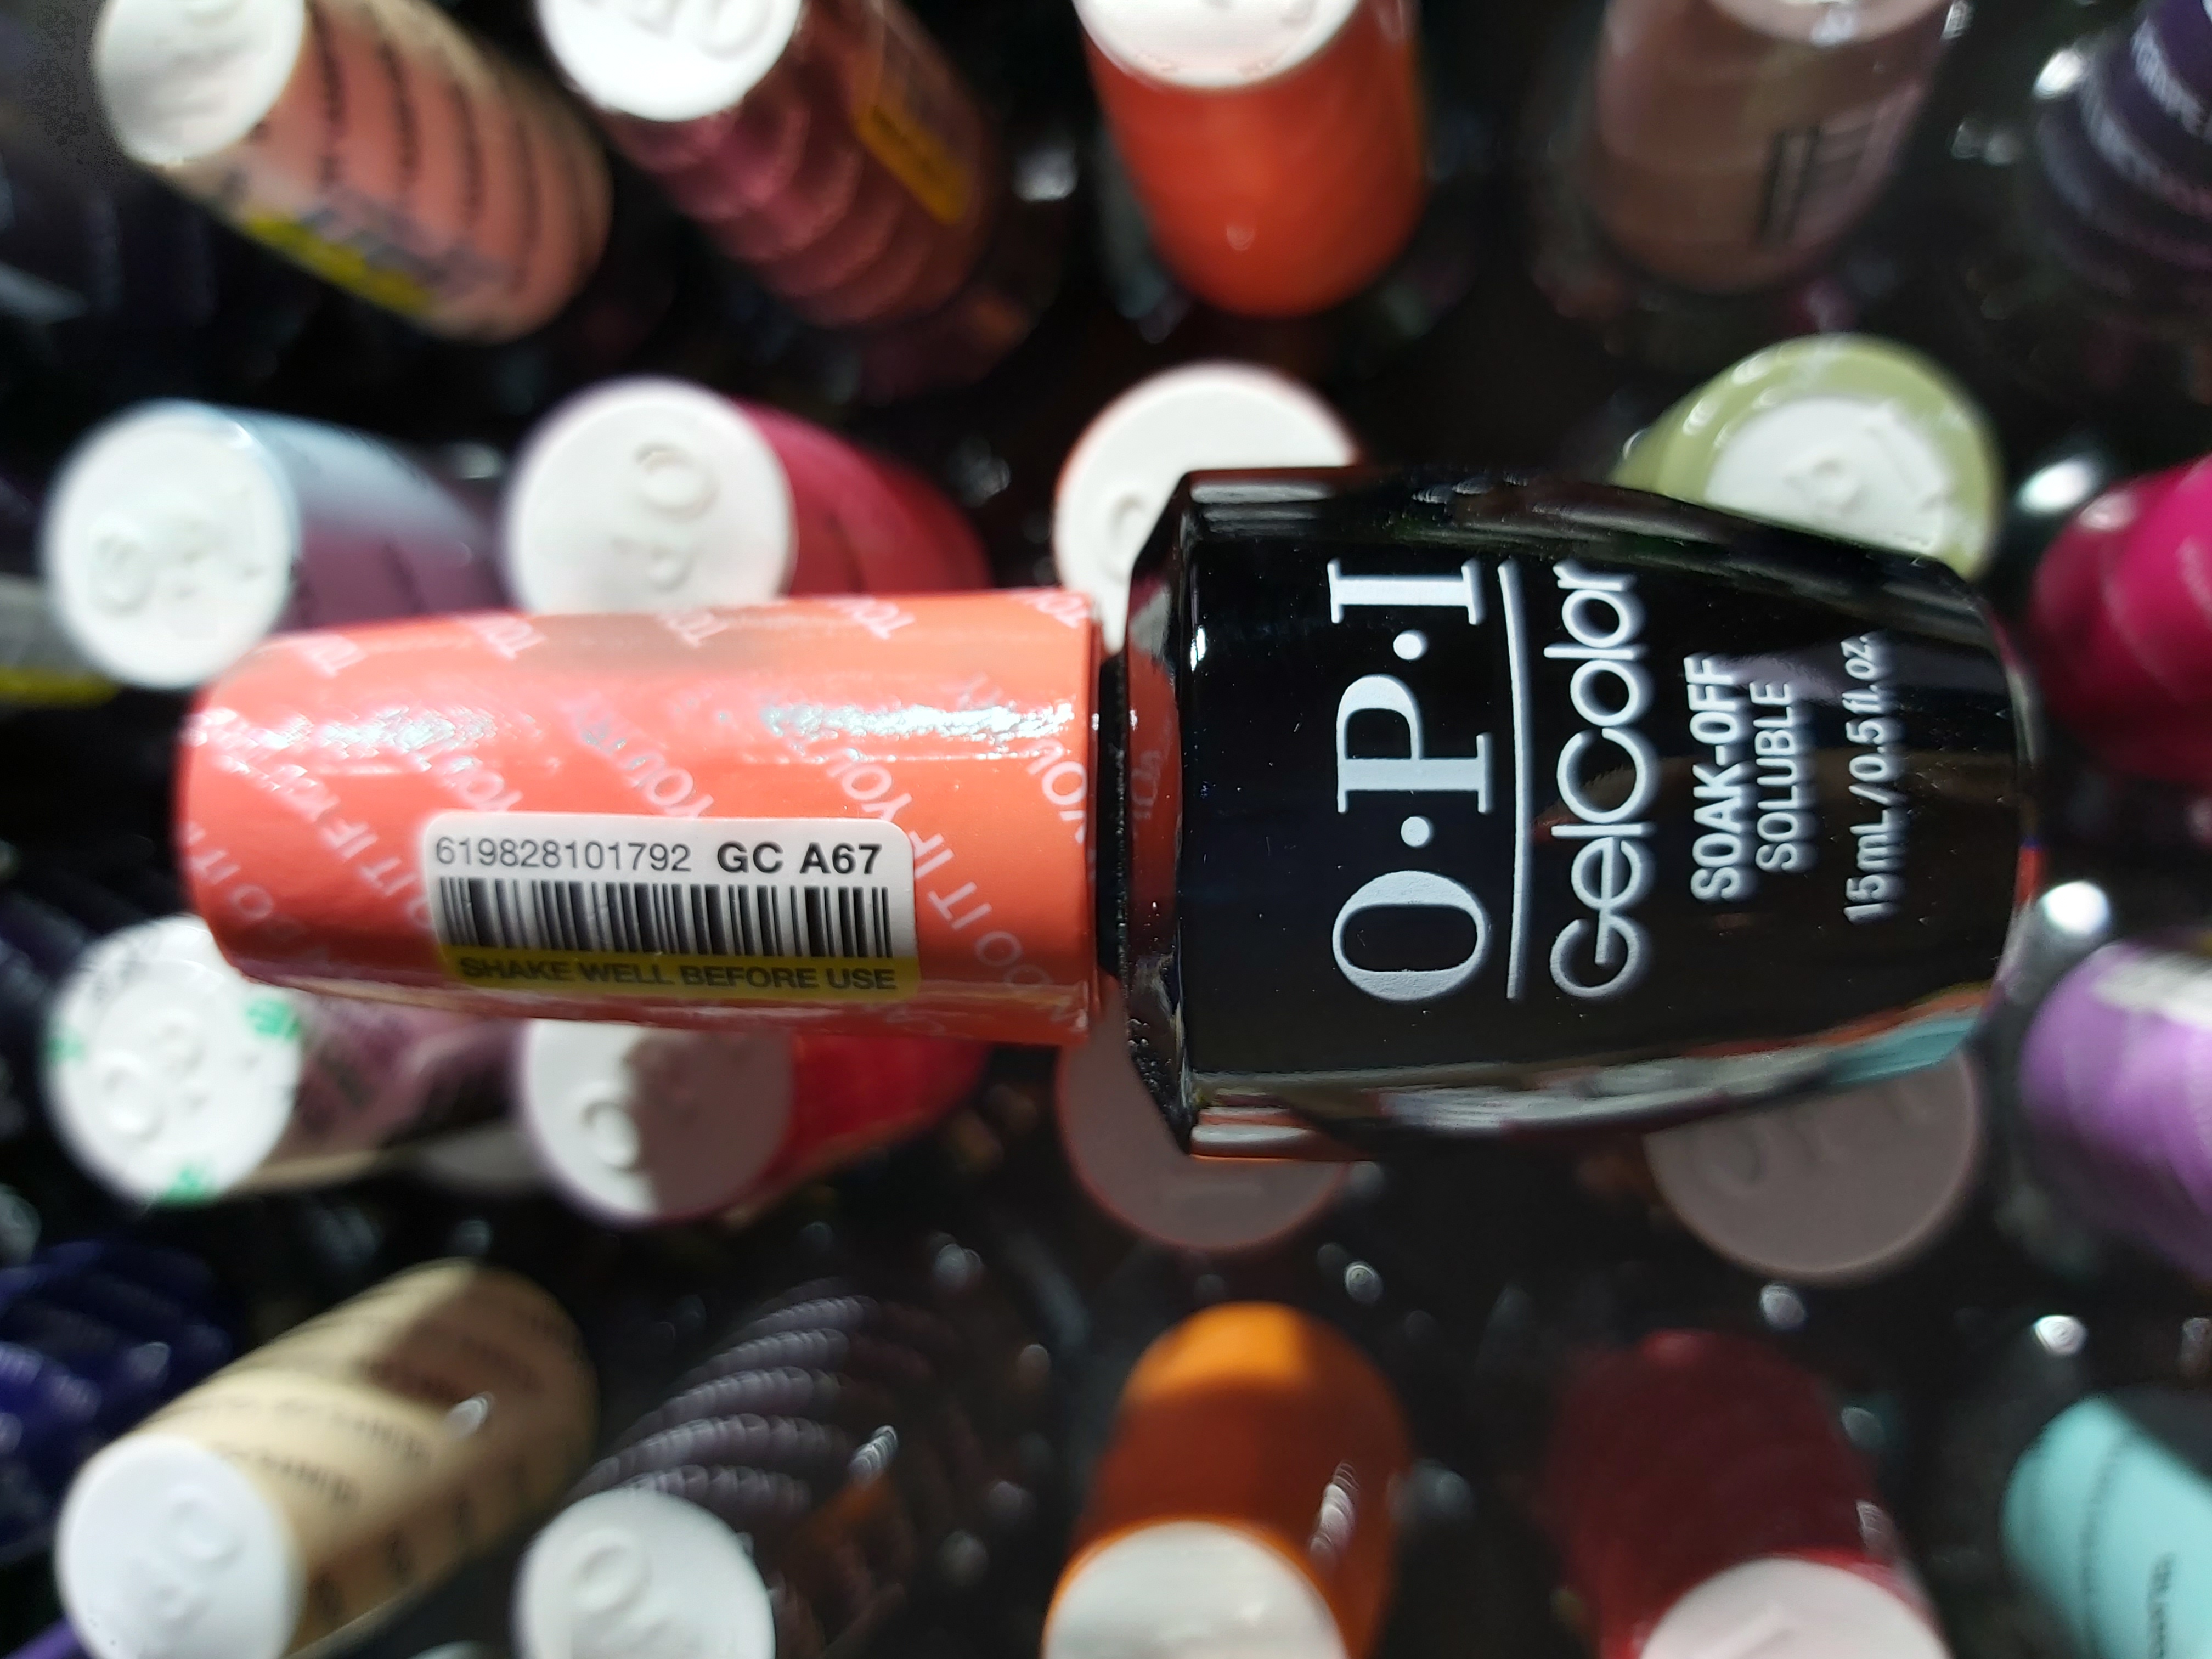 OPI Gel Color Soak-off Gel A67 TOUCAN DO IT IF YOU TRY orange rot red